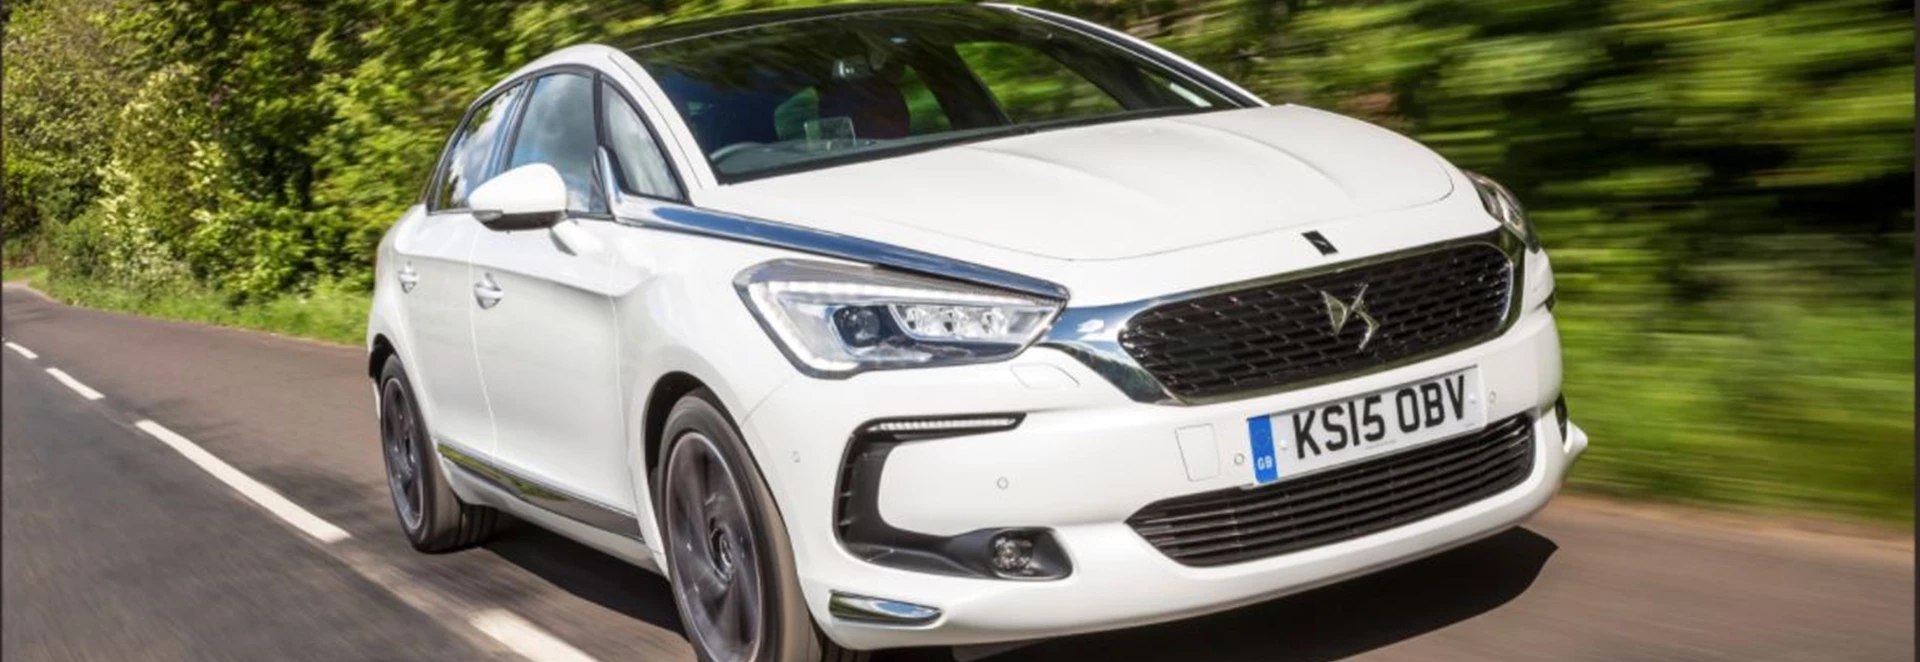 DS 5 Hatchback review 